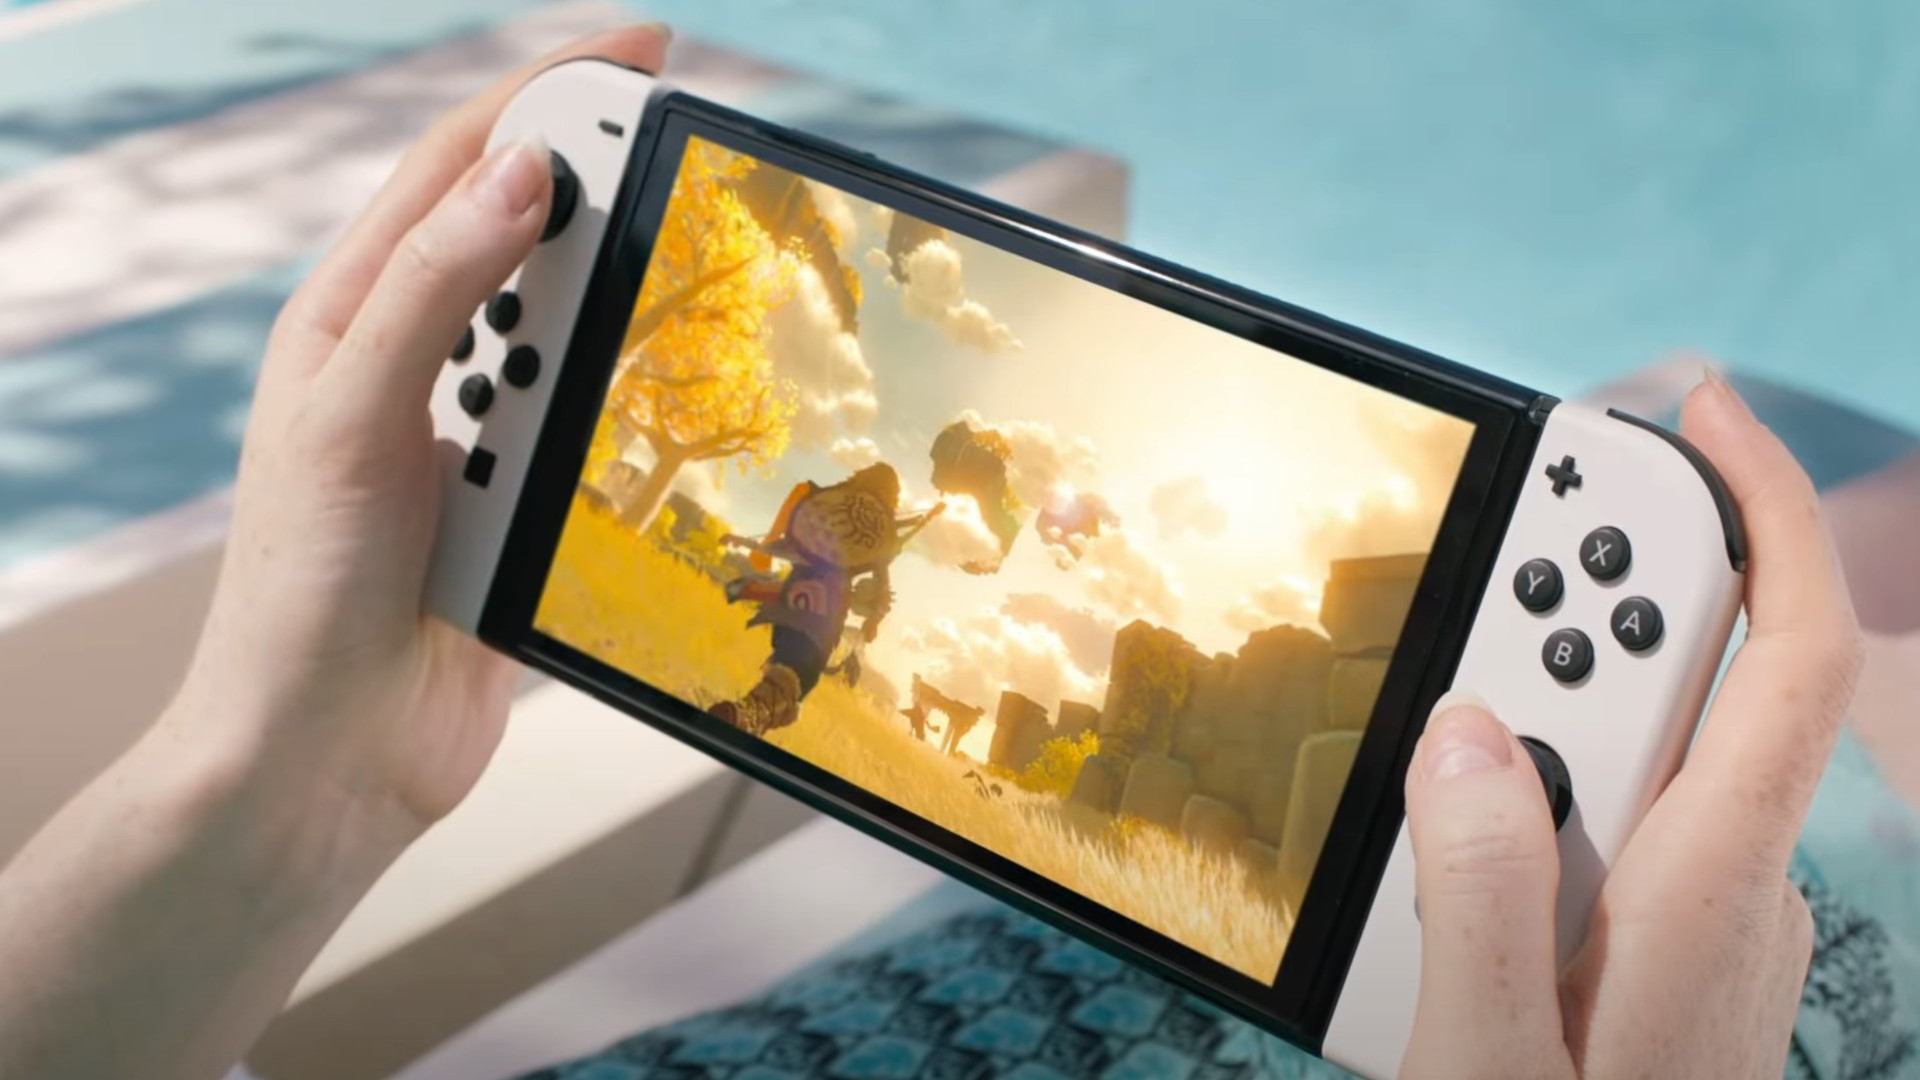 White Nintendo Switch OLED screen playing in handheld mode